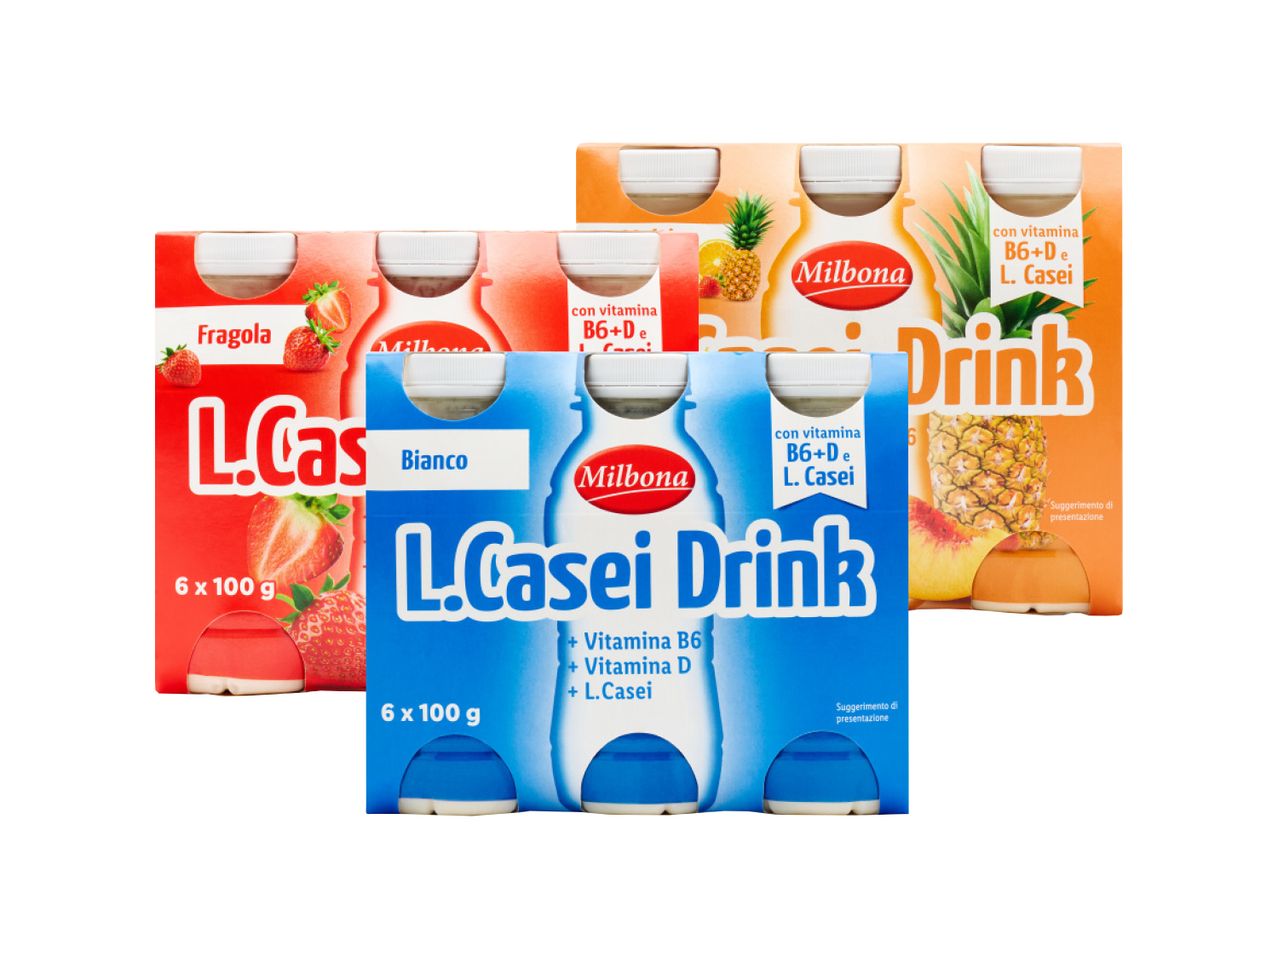 Go to full screen view: L.Casei Drink - Image 1